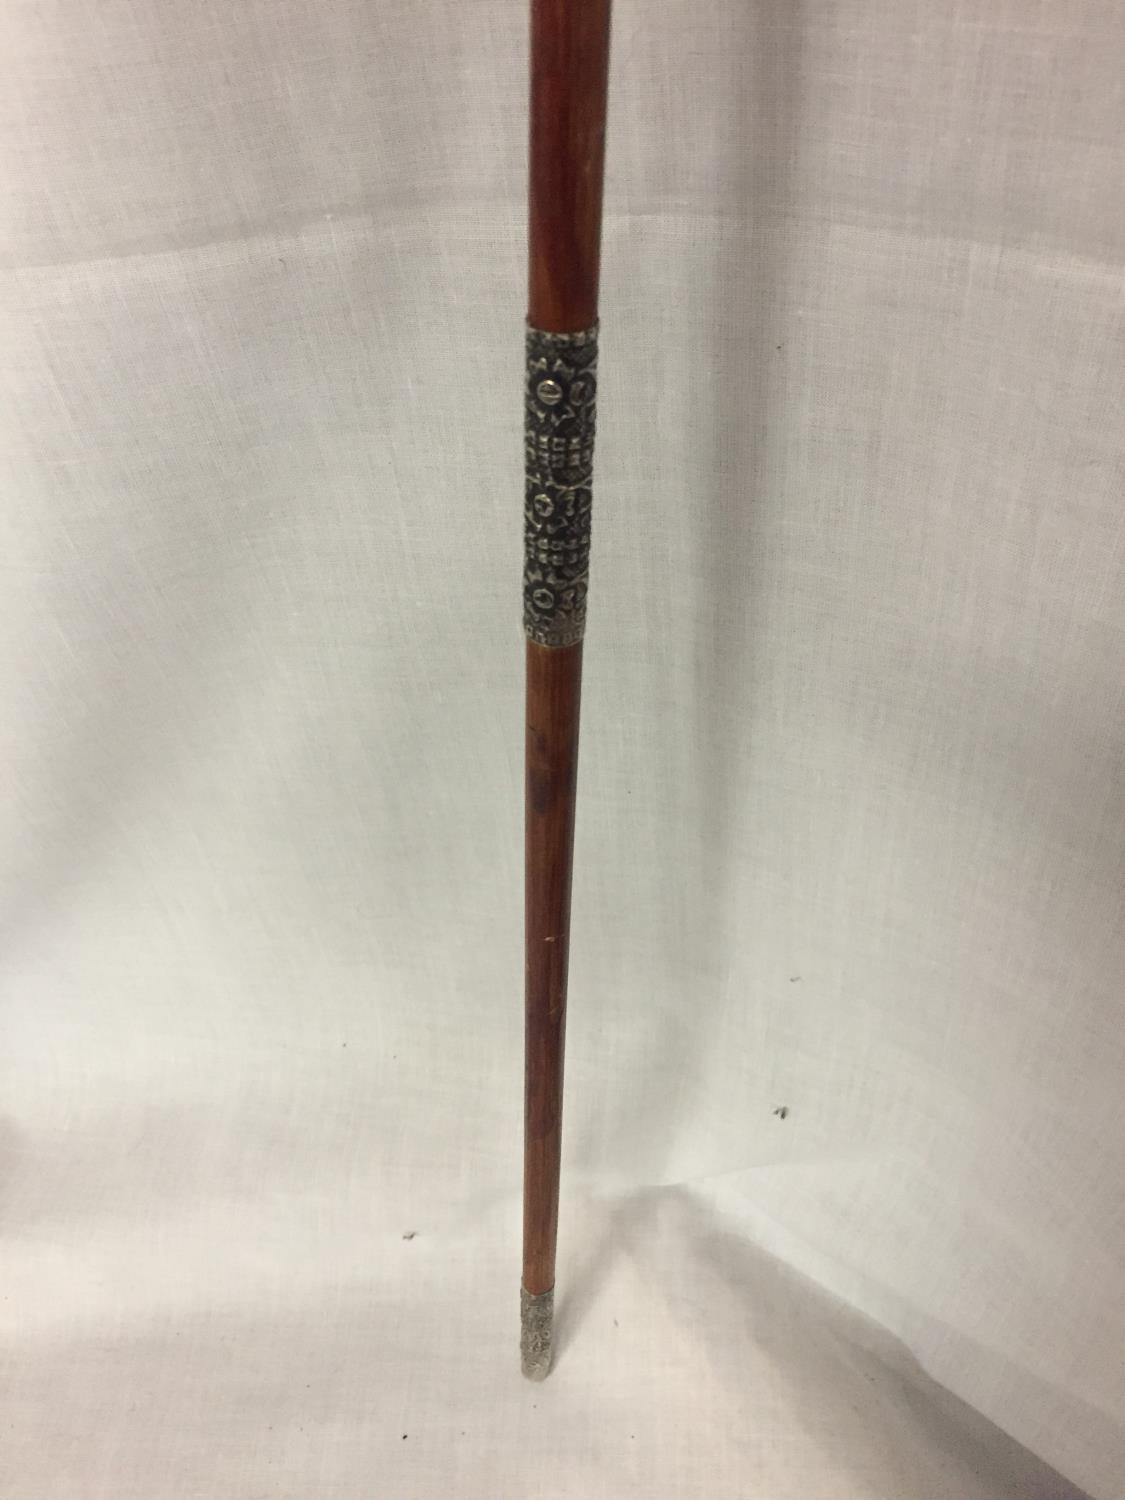 A LADIES SILVER CANE WALKING STICK - Image 4 of 5